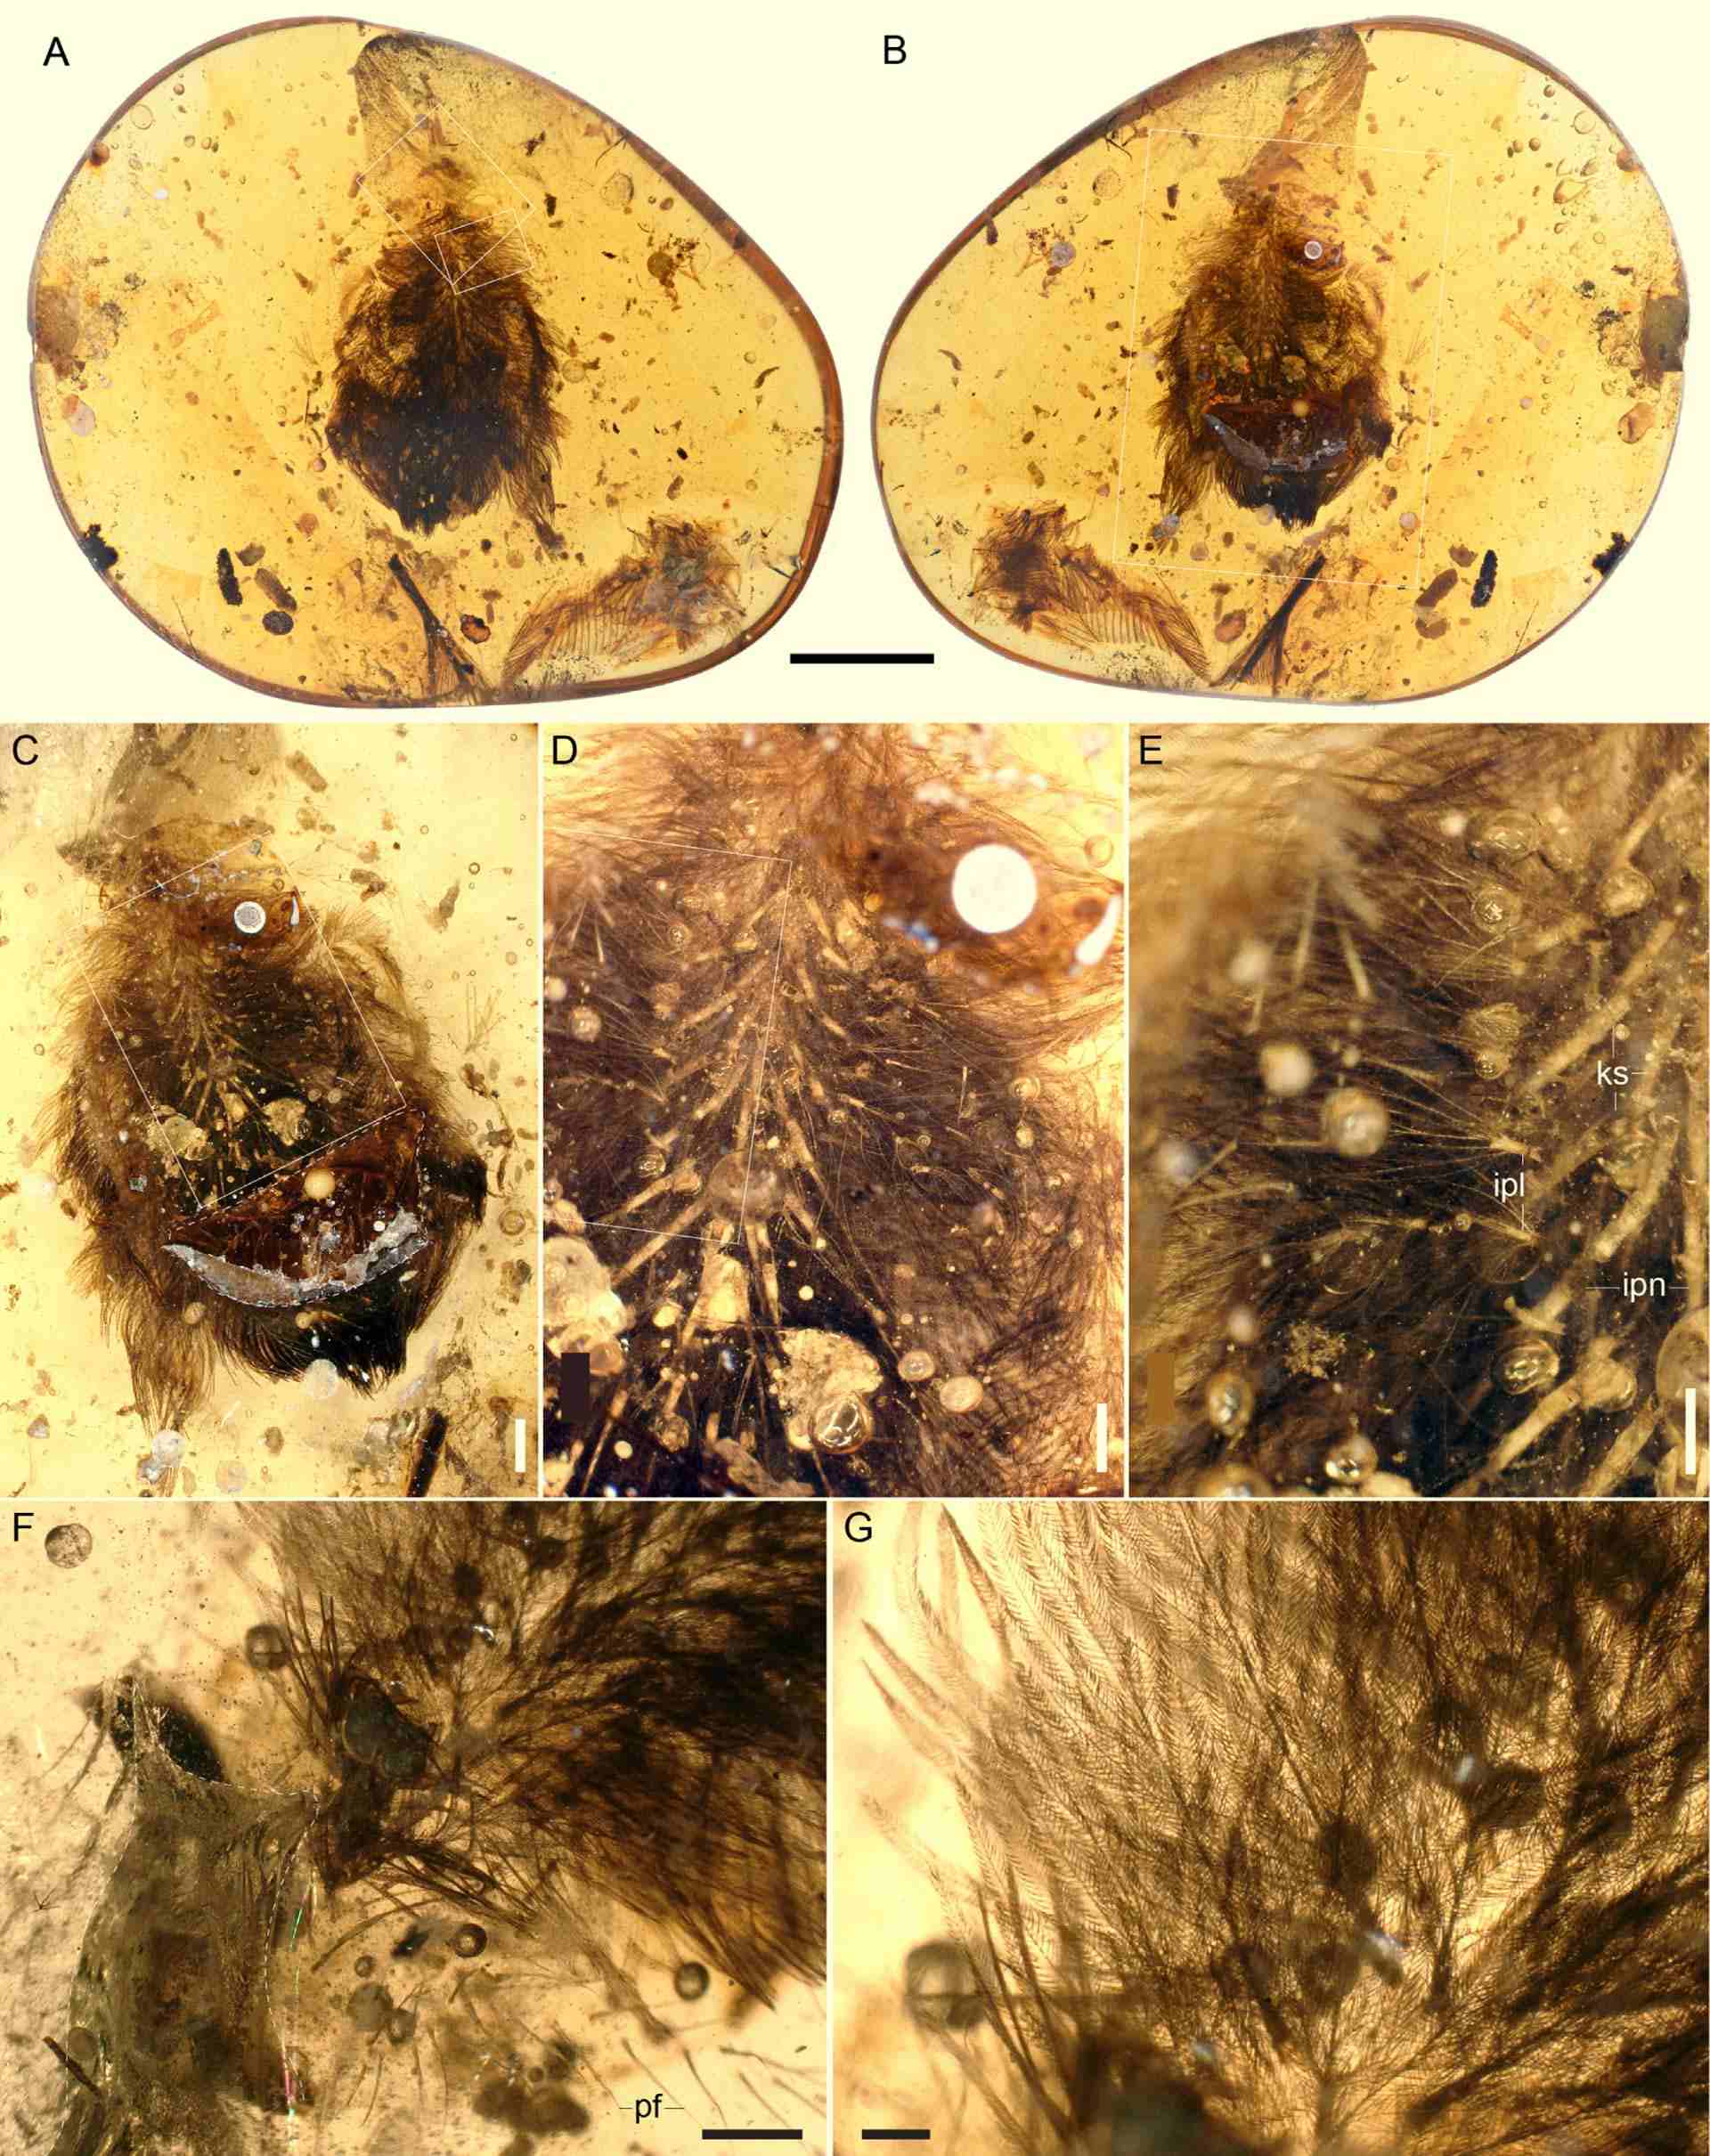 A small piece of Burmese amber preserving feathers interpreted as belonging to a juvenile enantiornithine bird: (A) amber with the dorsal surface of the feather cluster exposed; (B) ventral surface exposed; (C) close up of the ventral surface (region marked in B); (D) close up of the ventral surface region marked in (C); (E) close up of the ventral surface region marked in (D); (F) close up of the dorsal surface marked in (A, larger rectangle); (G) close up of the dorsal surface marked in (A, smaller rectangle). Dotted lines indicate desiccation surfaces. Scale bars – 0.5 mm in (A, B, D and F), 0.1 mm in (C); 0.3 mm in (E); and 0.2 mm in (G). Anatomical abbreviations: ipl – immature plumaceous feather; ipn – immature pennaceous feather; ks – keratinous sheath; pf – probable filamentous ‘protofeathers.’